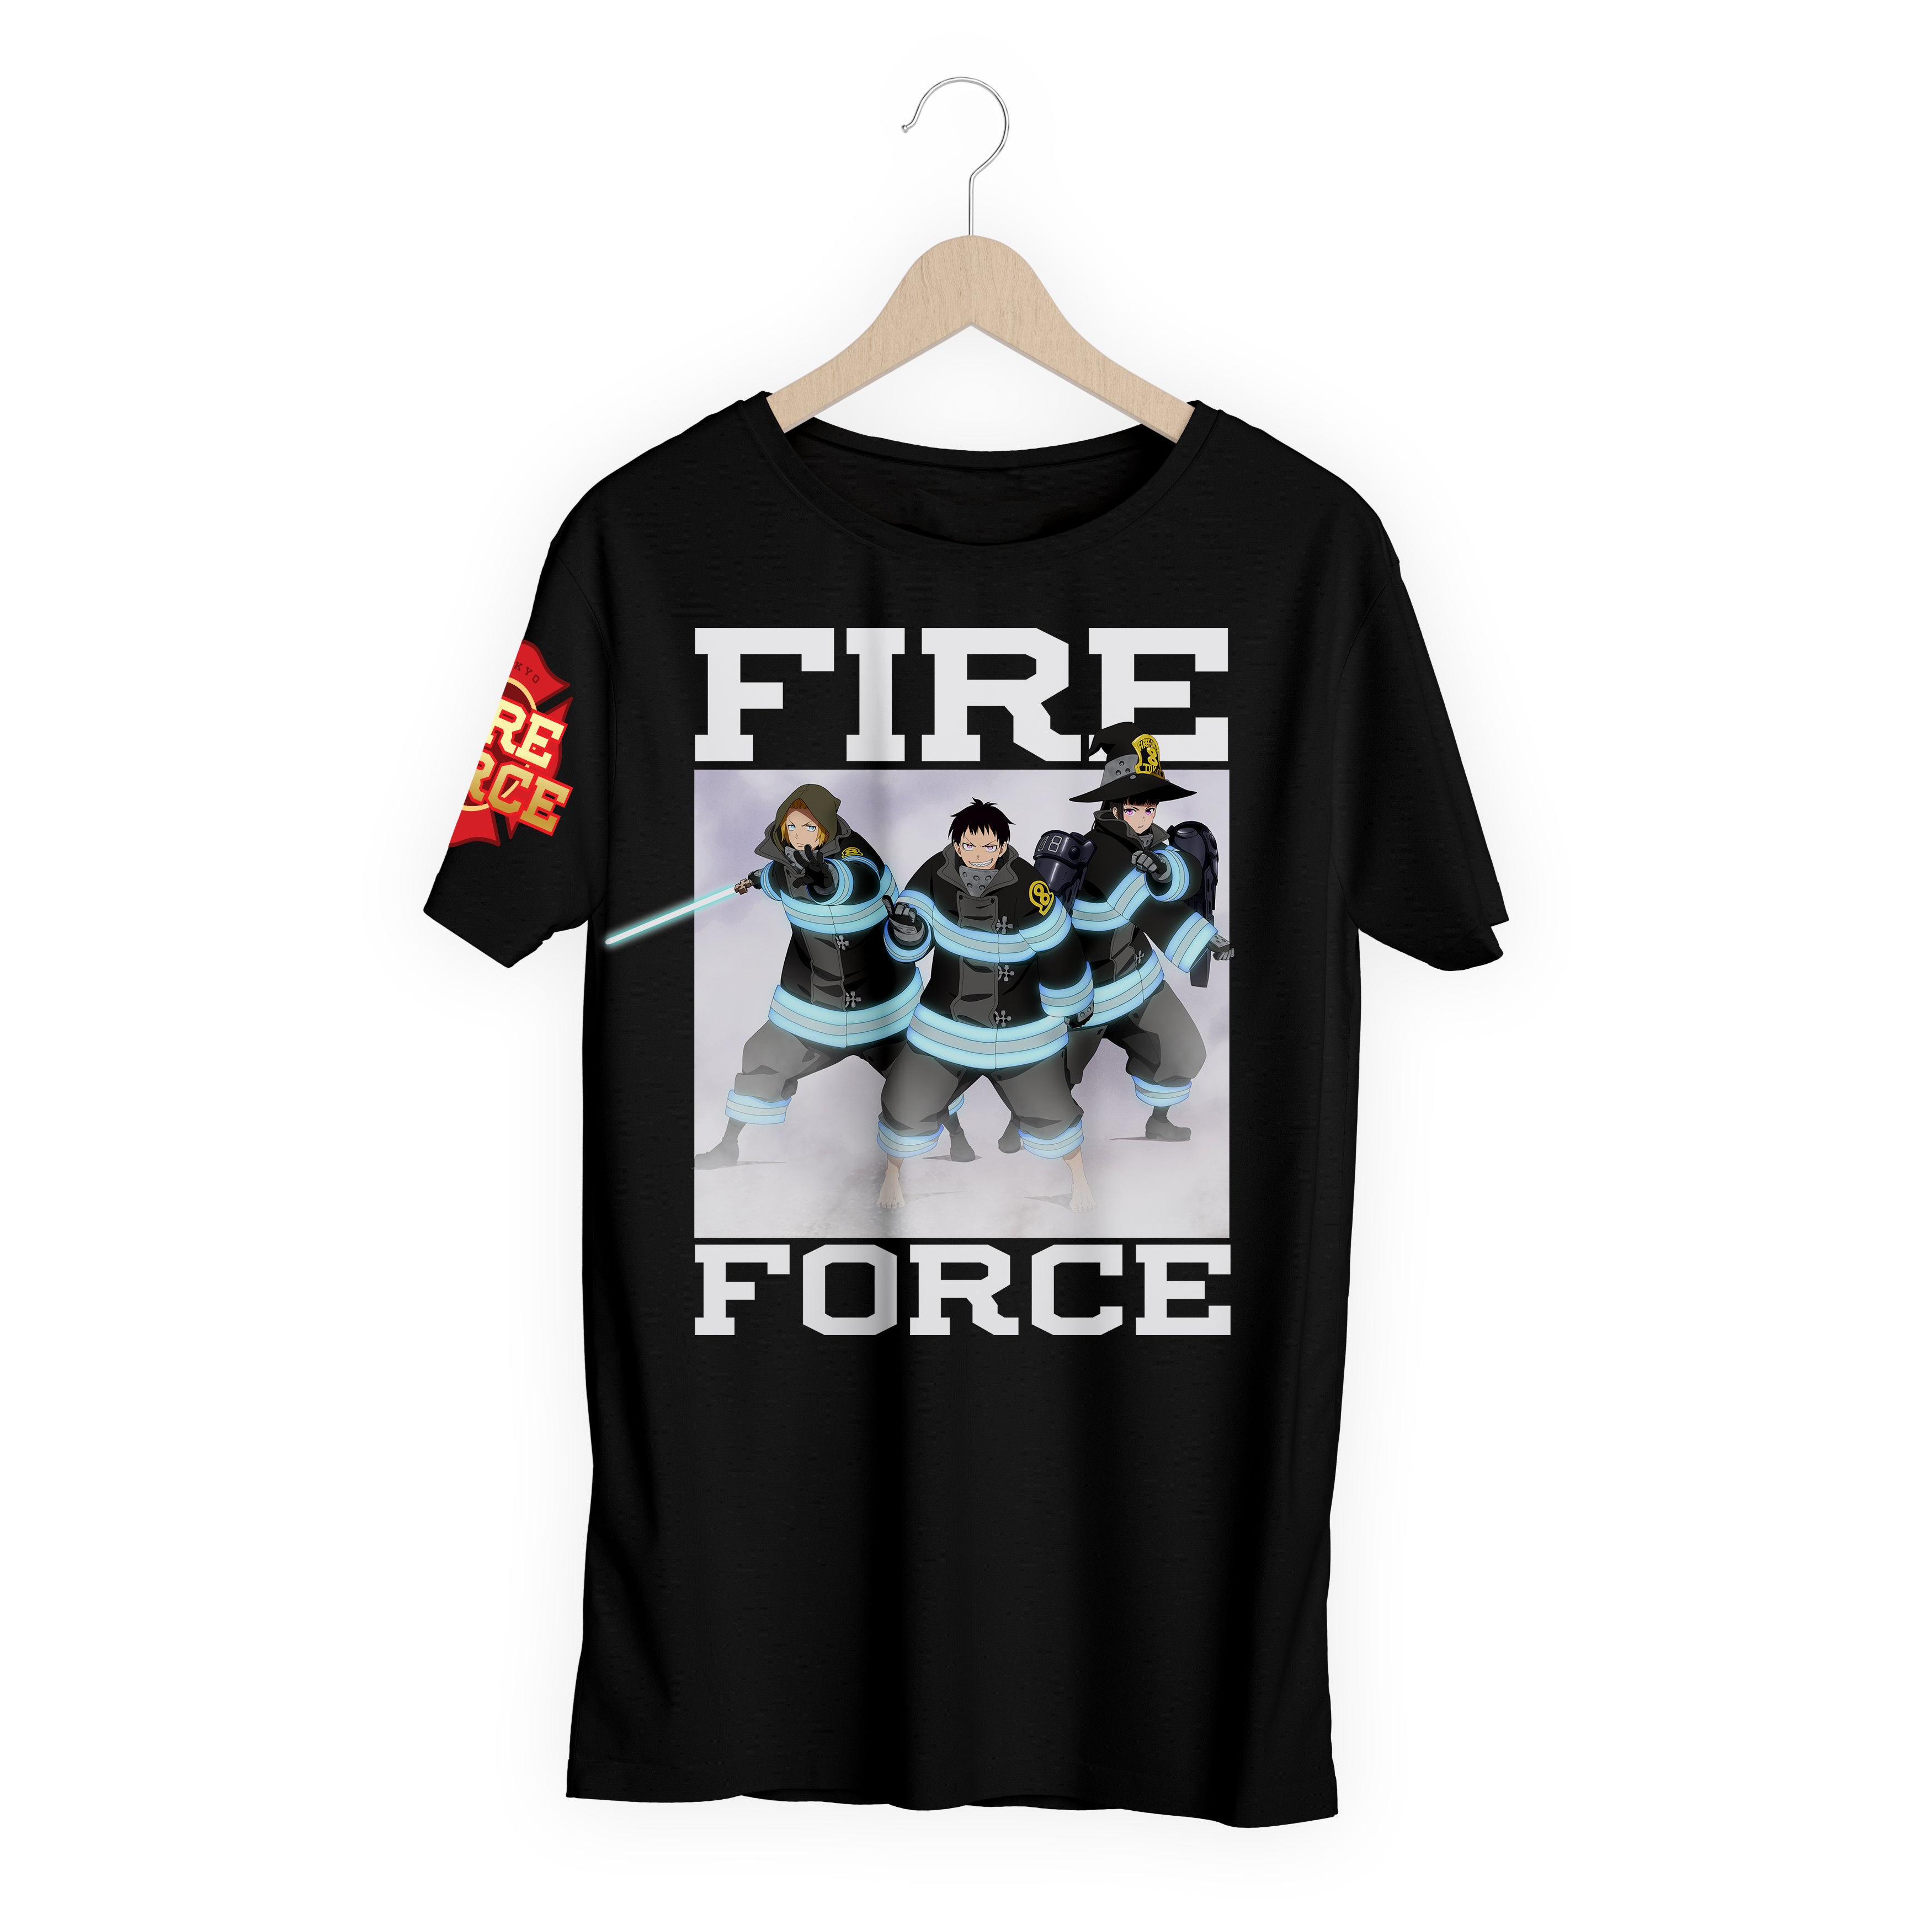 Fire Force - FunimationCon 2020 T-Shirt image count 2